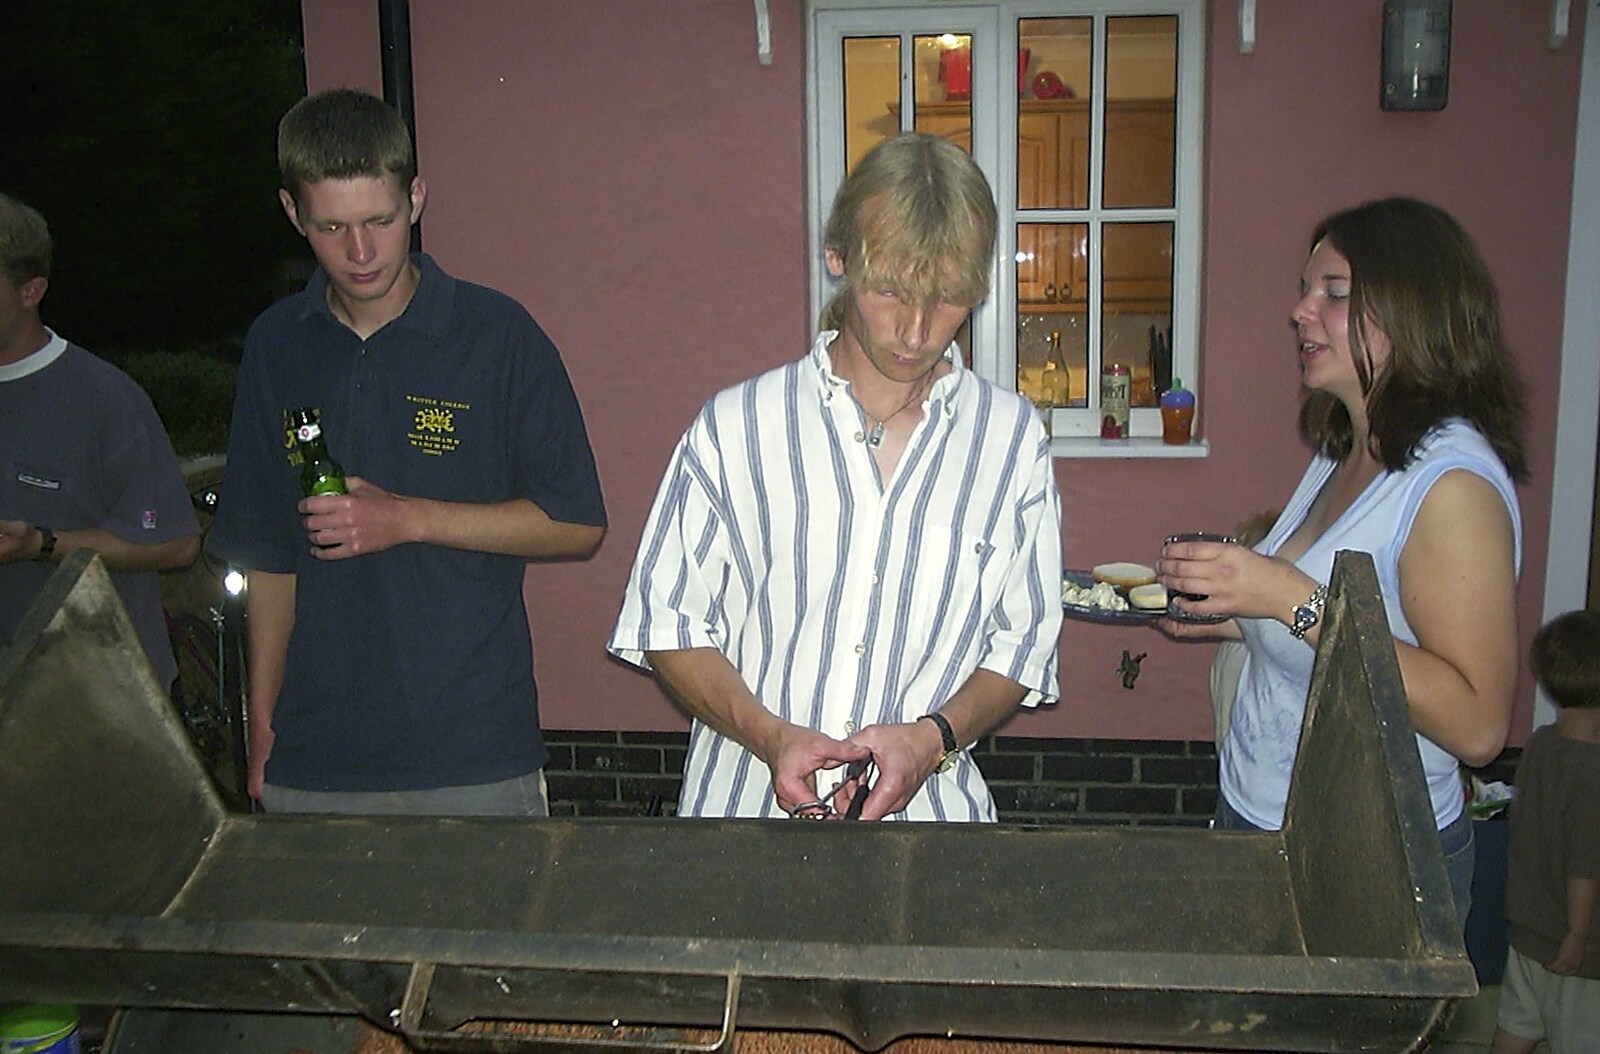 Jimmy pokes the barbeque from The BSCC in Debenham, and Bill's Housewarming Barbie, Yaxley, Suffolk - 31st July 2004